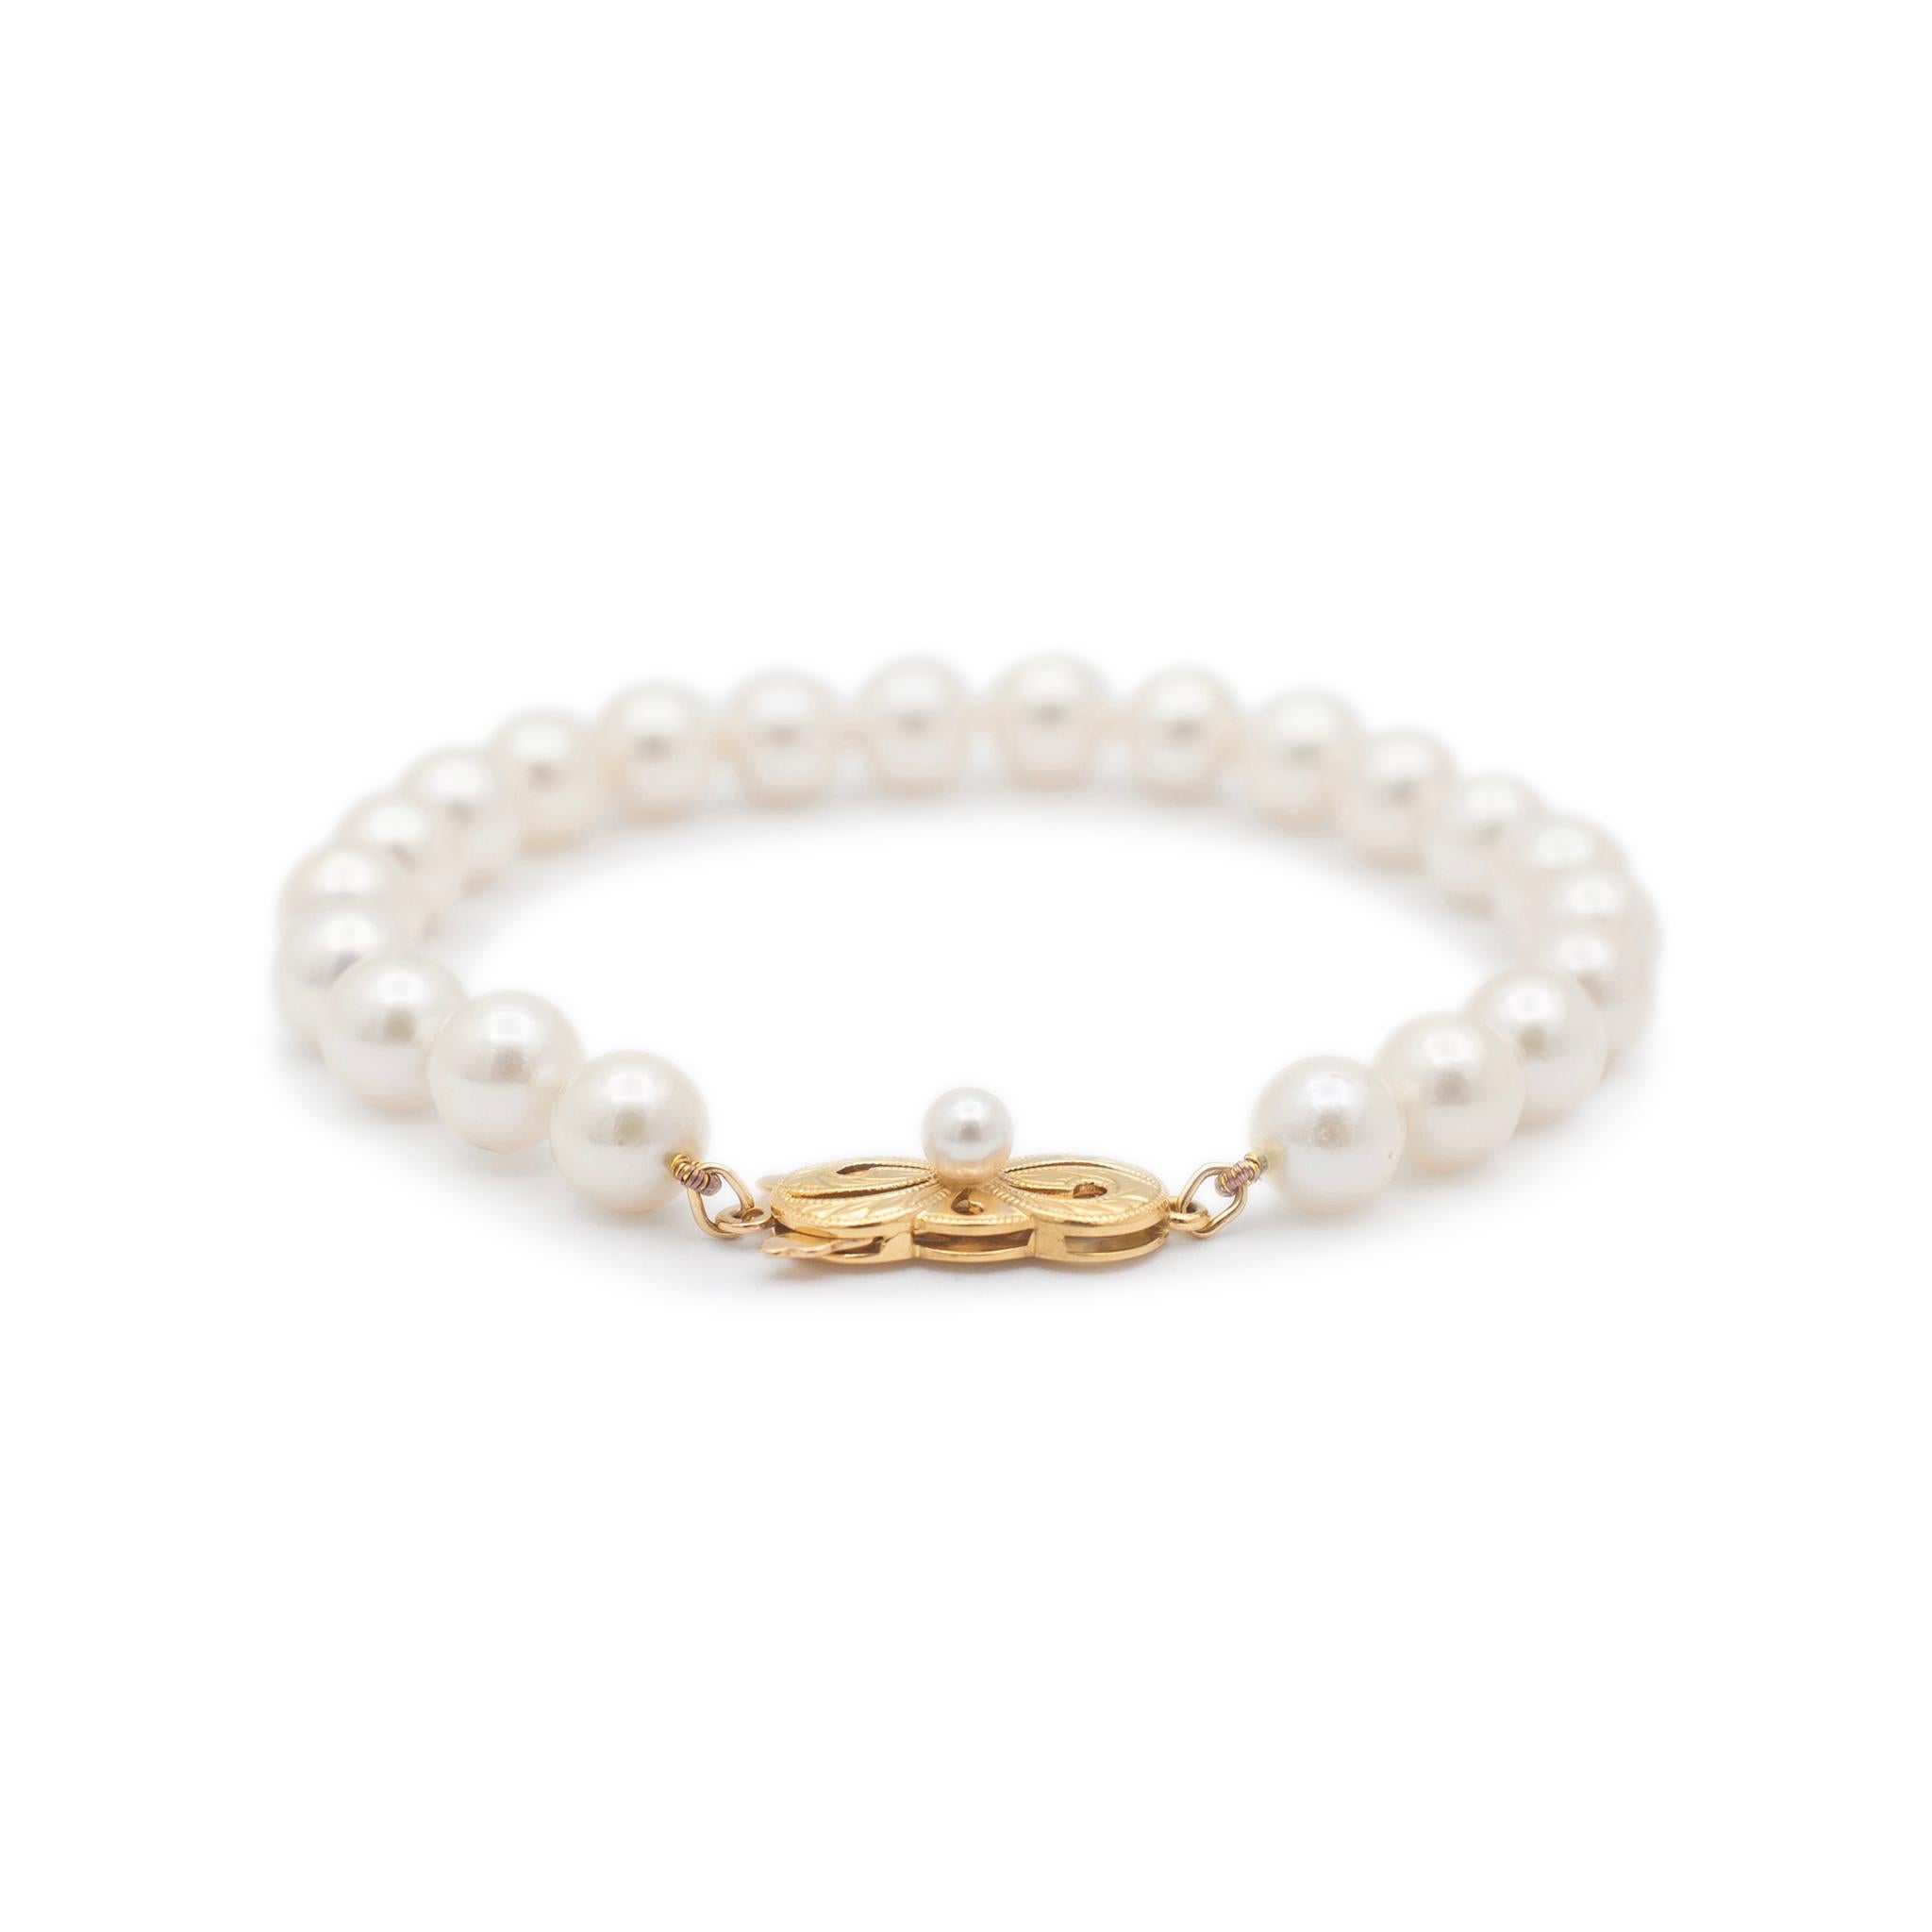 Mikimoto Akoya Pearl Strand Link Bracelet - 18K Yellow Gold Clasp In Excellent Condition For Sale In Houston, TX